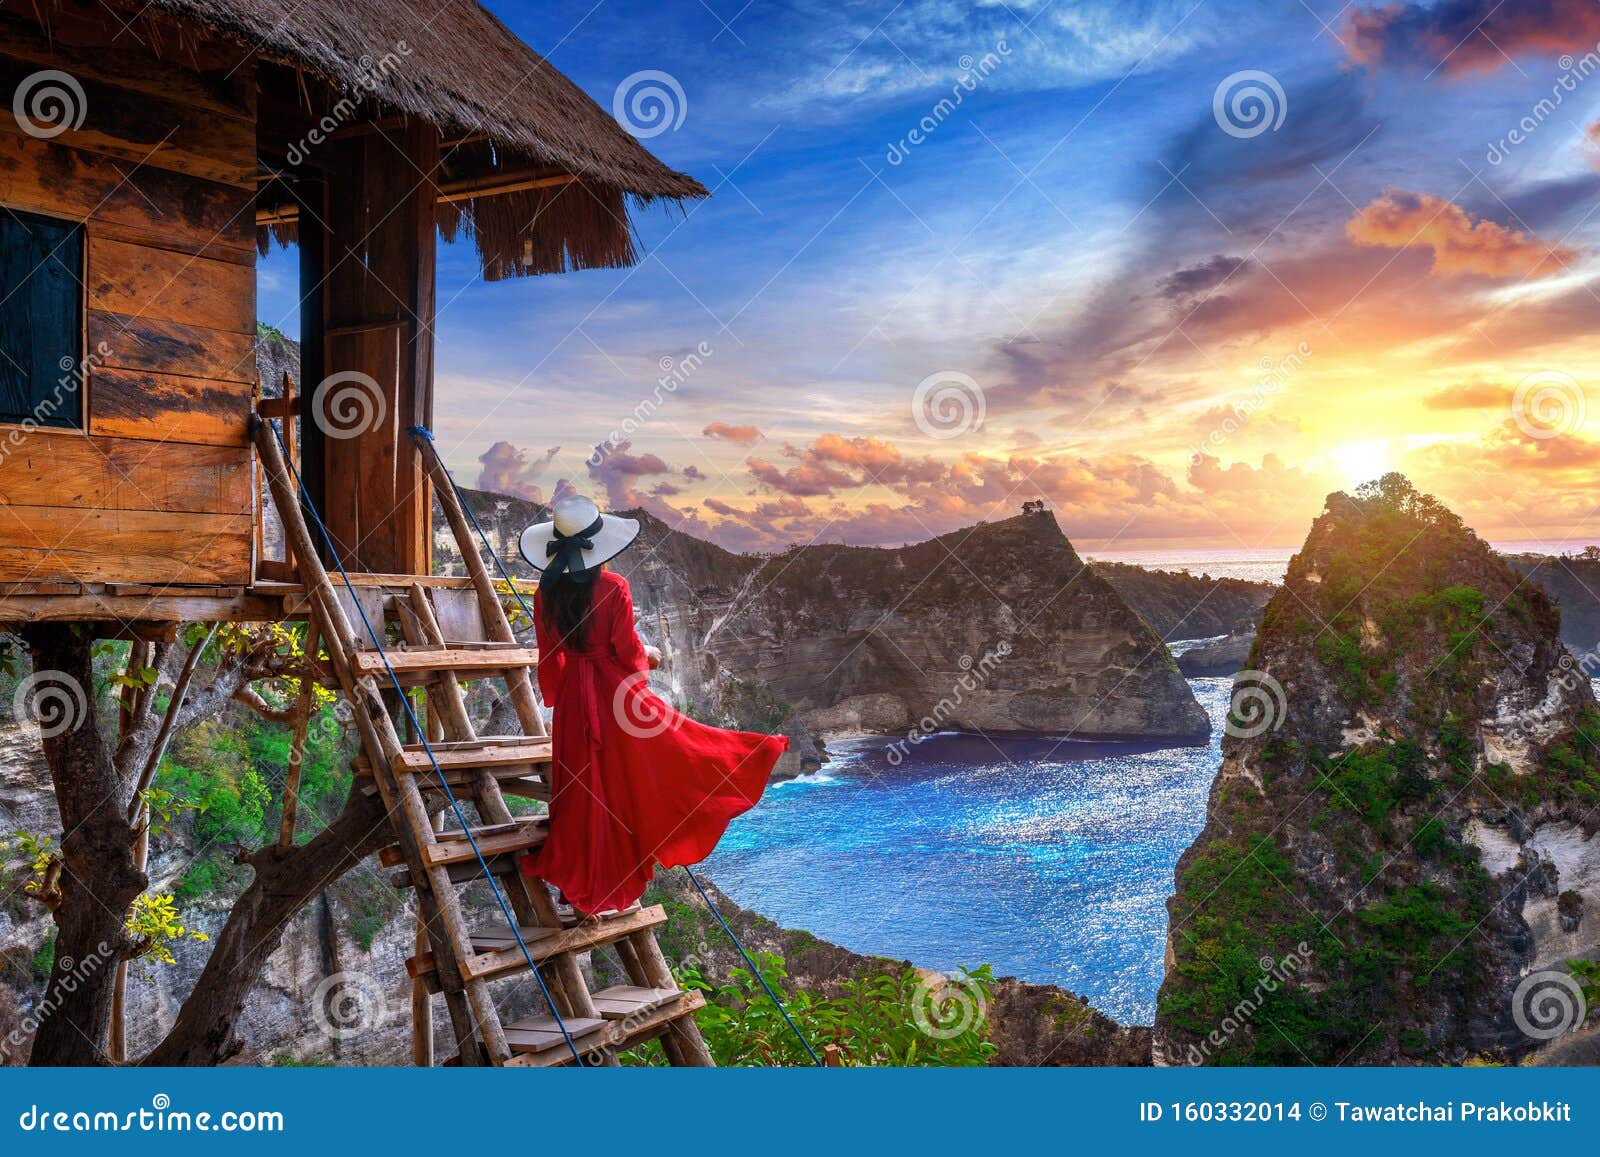 young girl on steps of house on tree at sunrise in nusa penida island, bali in indonesia